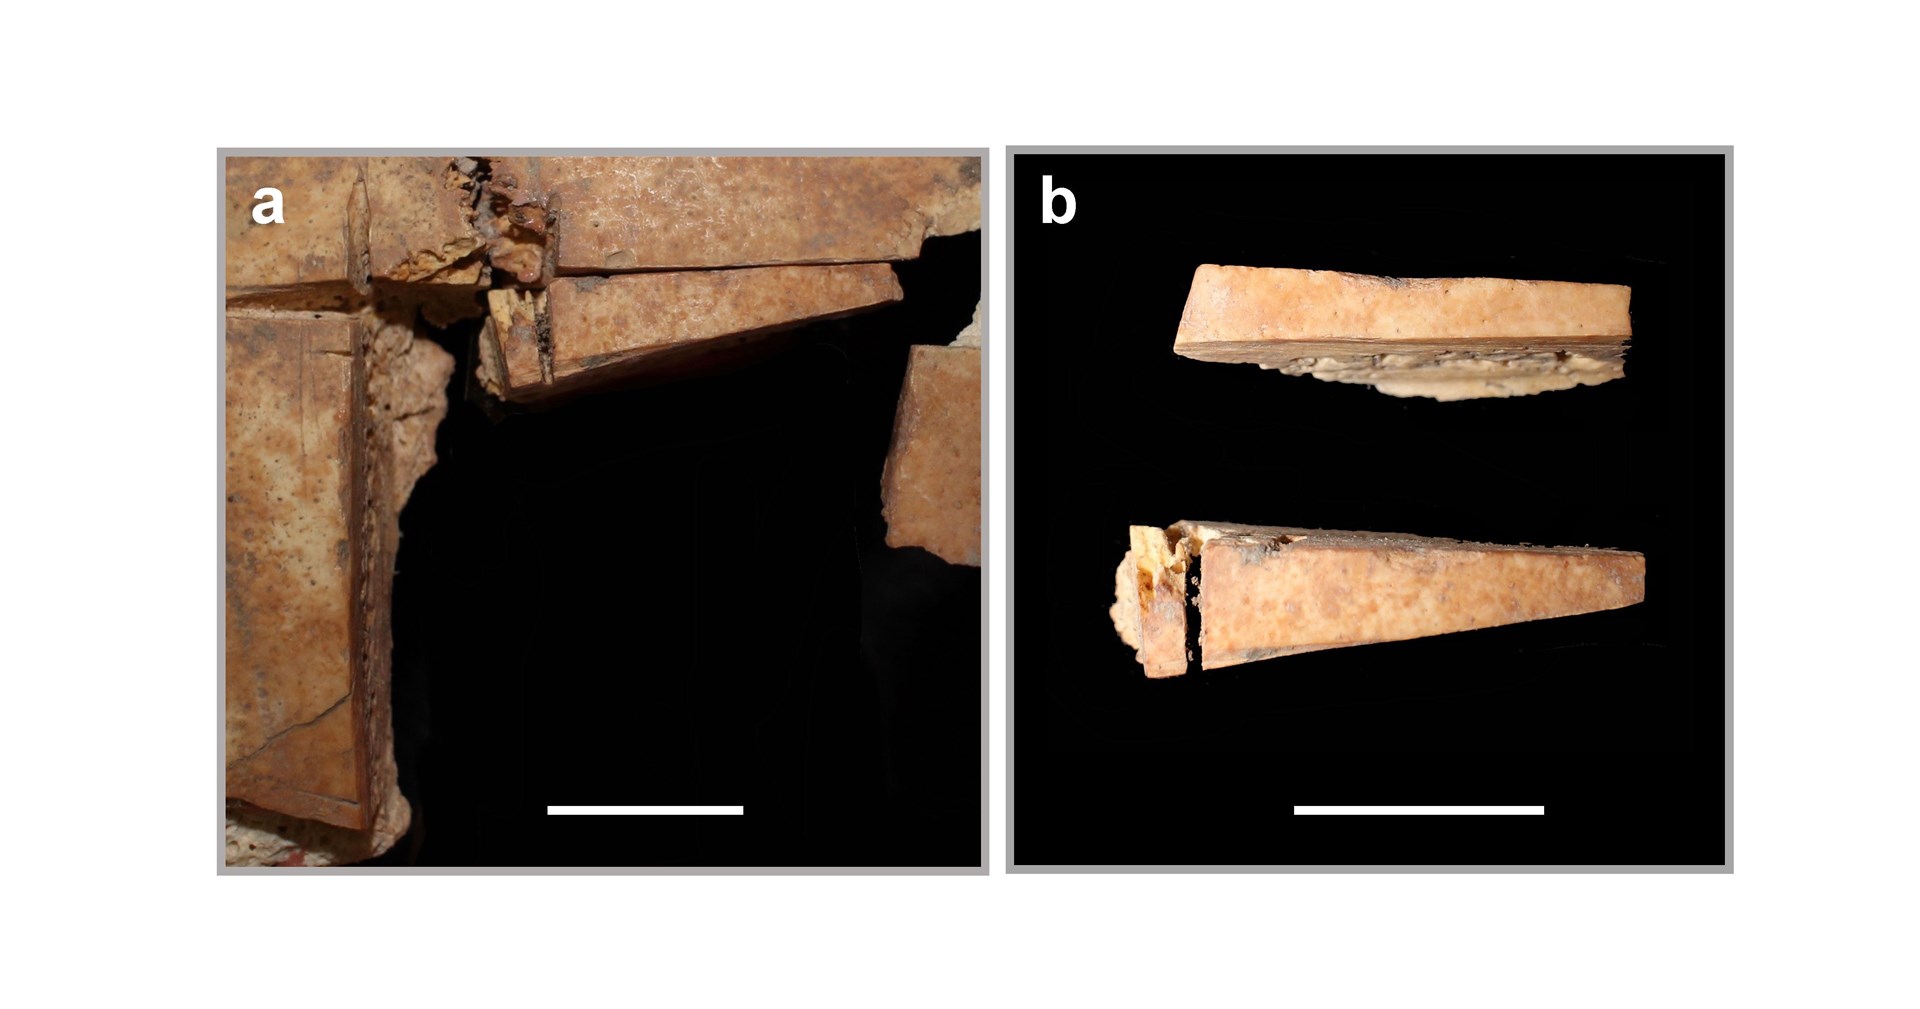 A closer look at the skull from where a piece of bone was surgically removed (Kalisher et al/Plos One/PA)